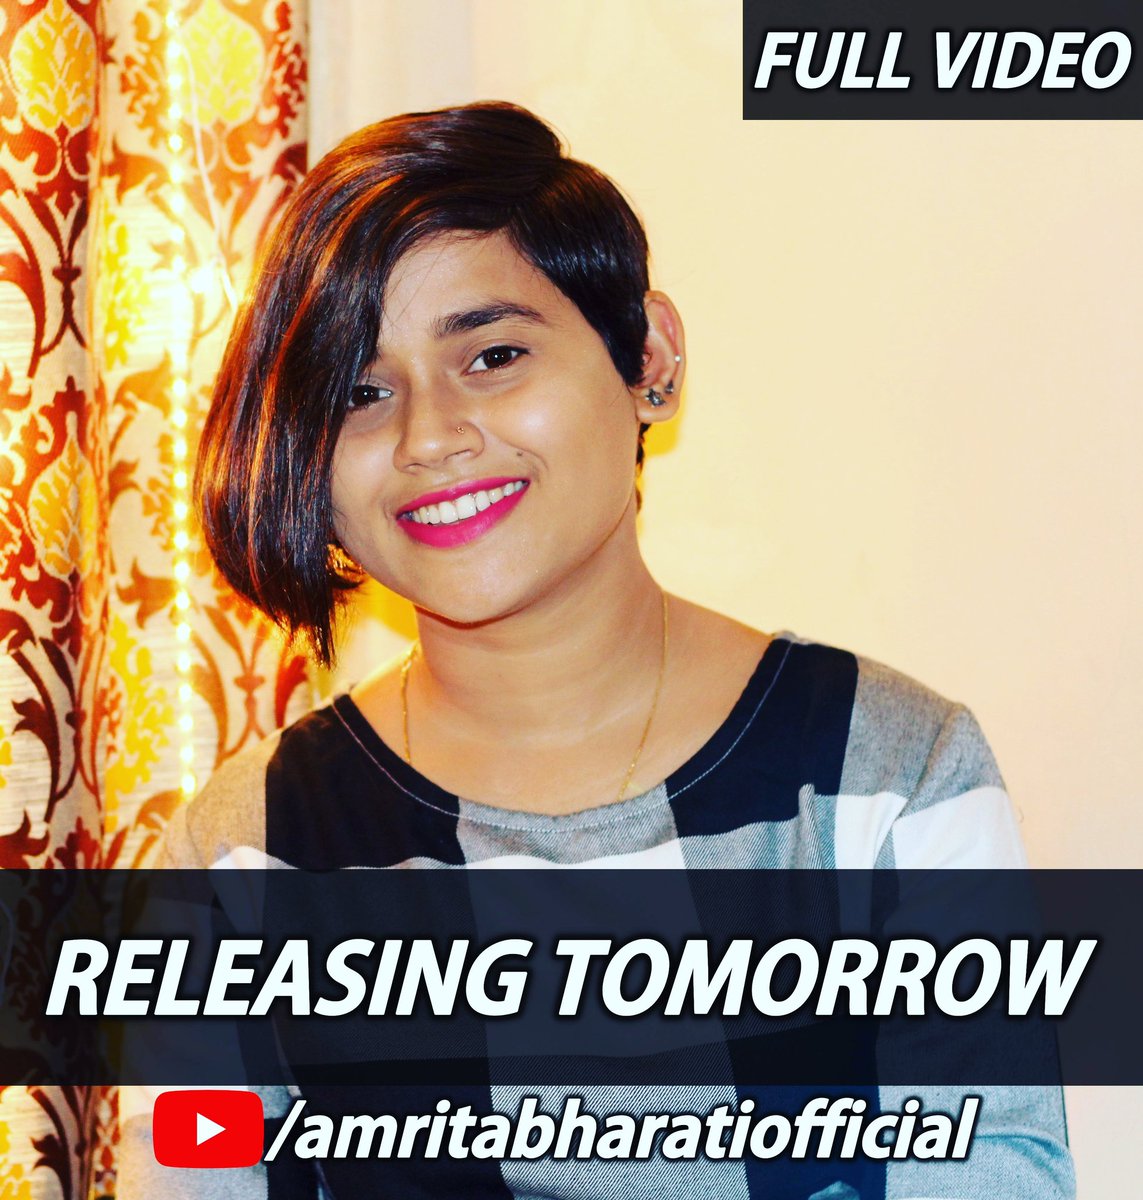 Releasing tomorrow on my #youtube channel 🎤
-
NEW MUSIC VIDEO
-
#staytuned to my Yt Channel to get notified ❤️
-
▶ Subscribe @ youtube.com/c/AmritaBharat…
-
#newmusic #newsong #new #coversong #music #mumbaisingers #instasinger #singers #amrita #musicislife